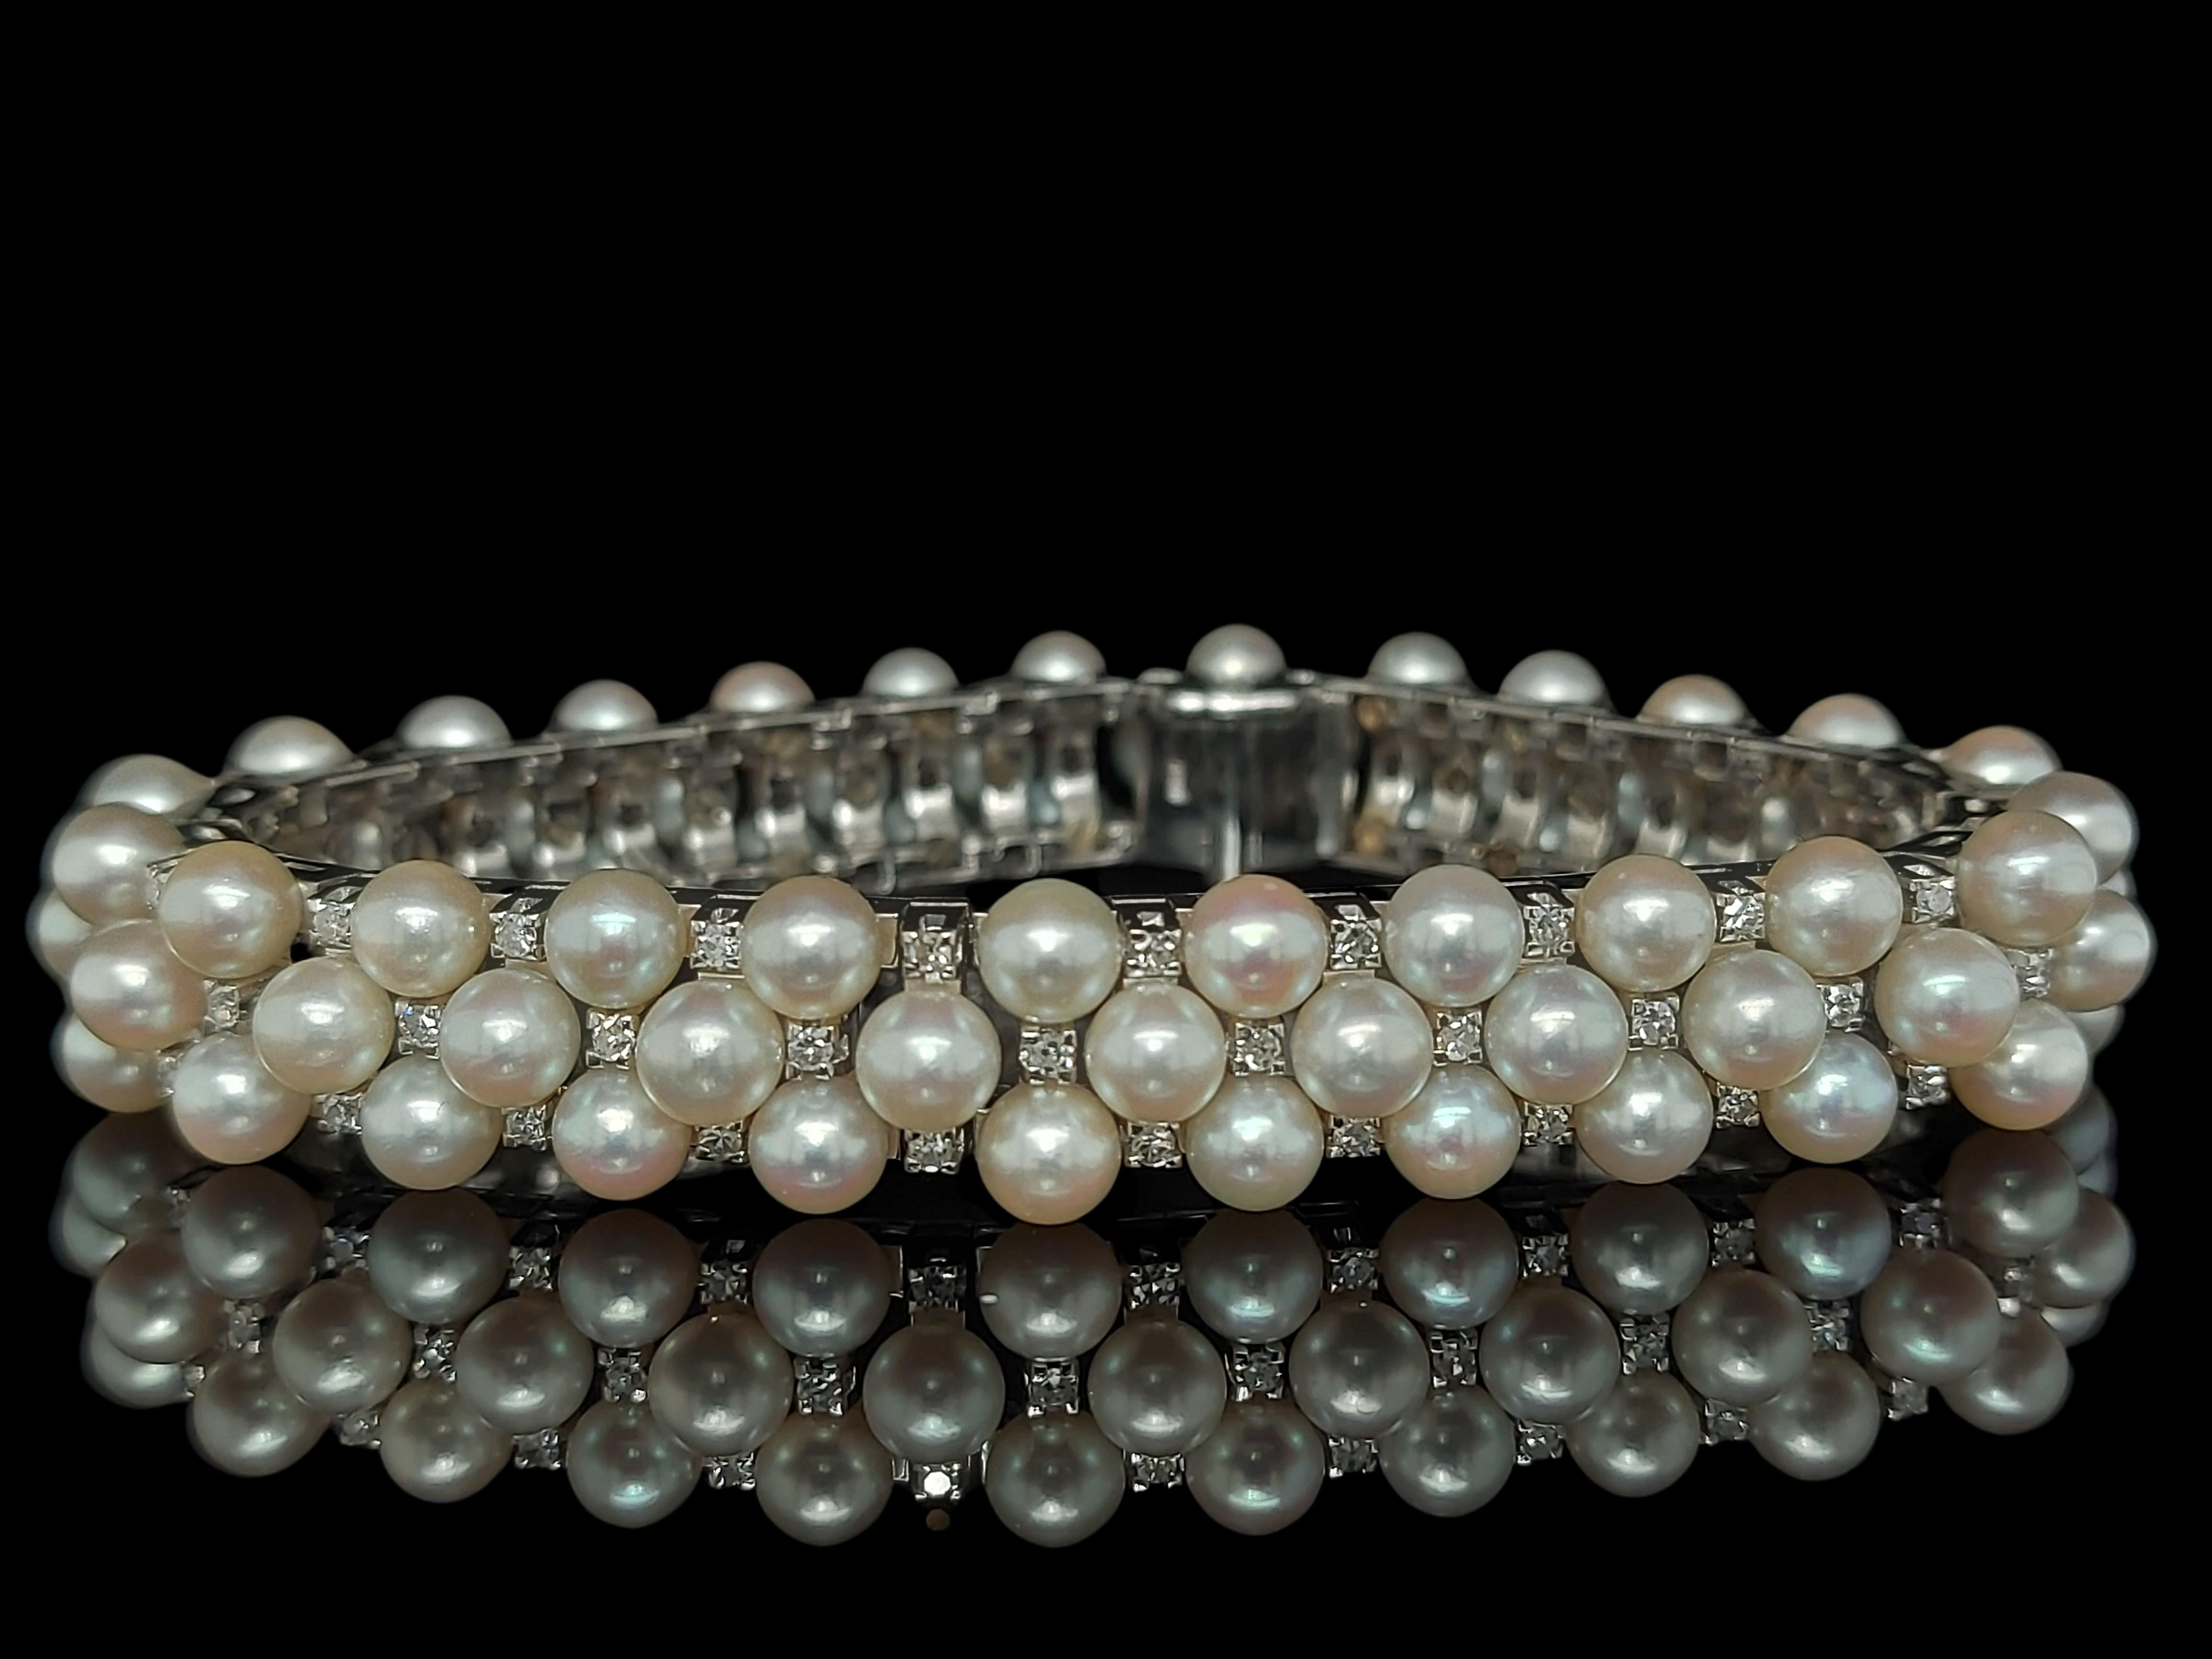 Stunning 18 kt White Gold Pearl and Diamond Bracelet

Diamonds: 75,  Total 1.5 Ct

Pearls: 75 (size 4.5mm)

Material: 18kt white gold

Total weight: 47.8 gram / 1.690 oz / 30.8 dwt

Measurements: Will max fit a 17 cm wrist
